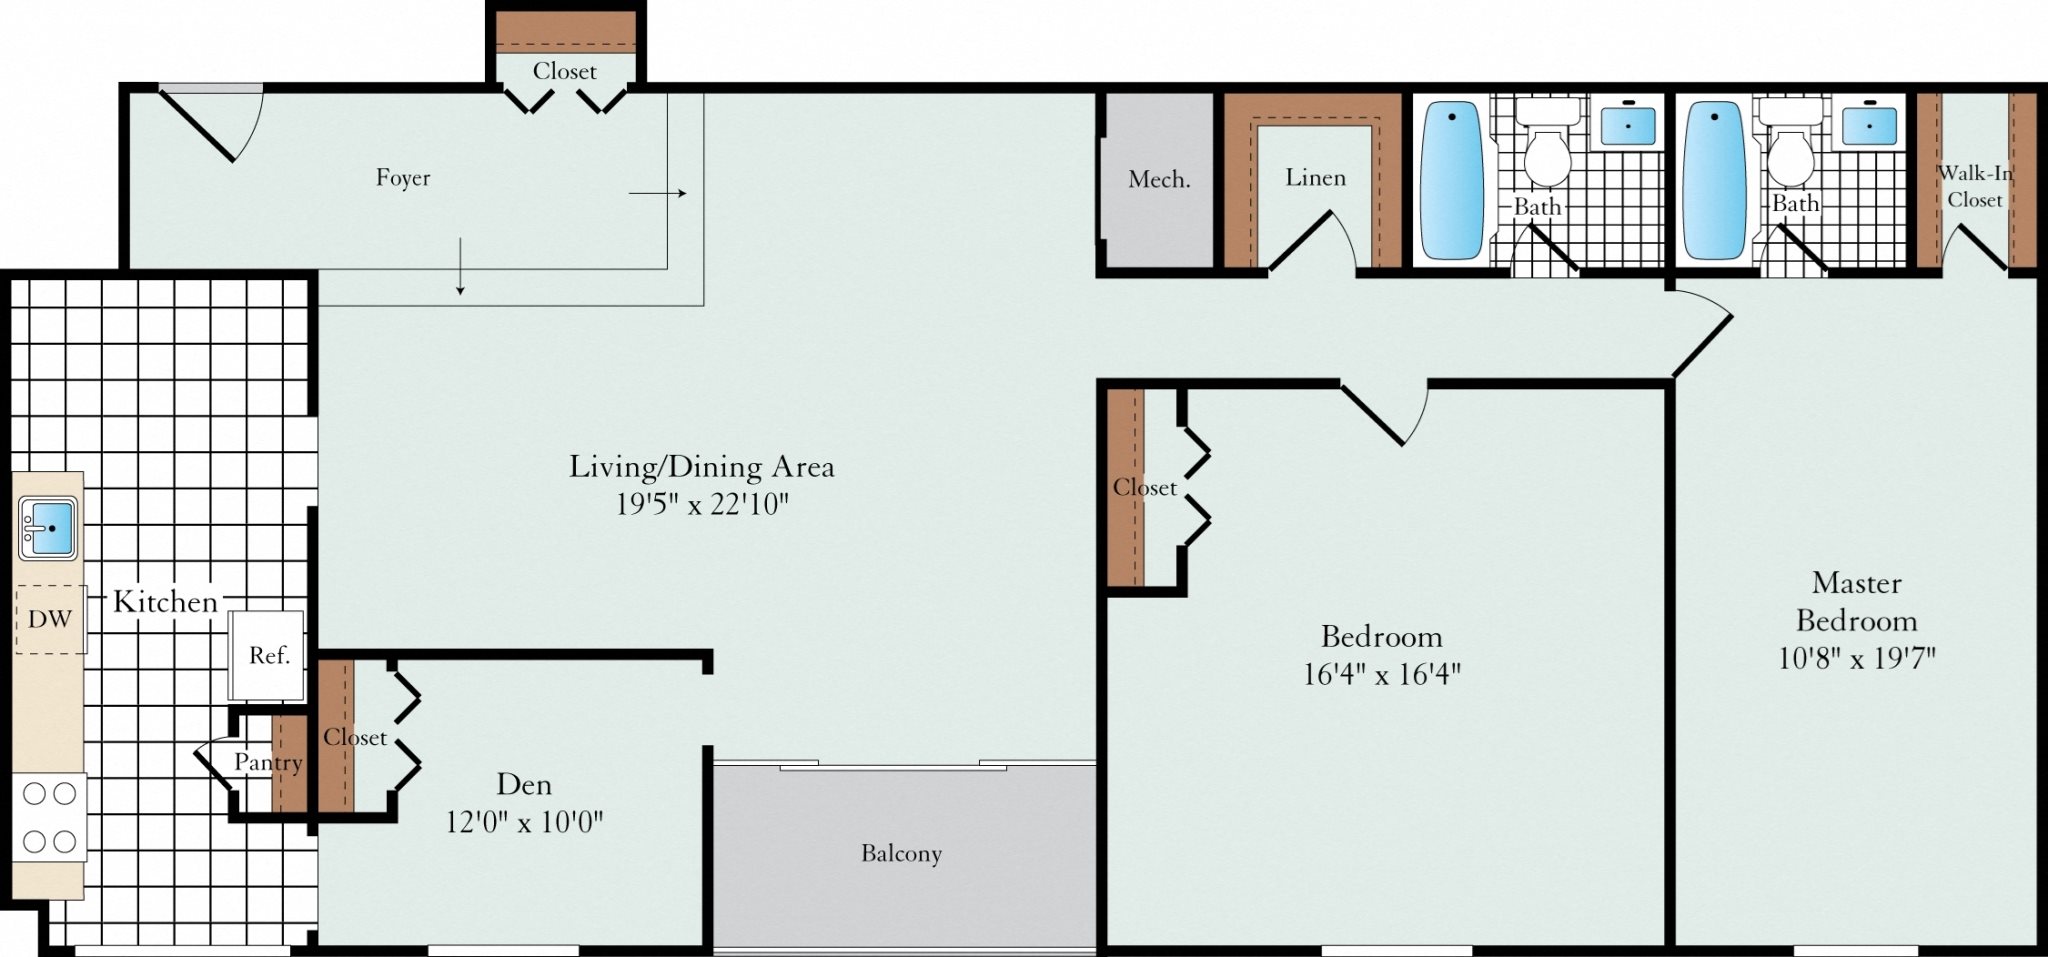 Floor Plans of Hickory Hill in Suitland, MD